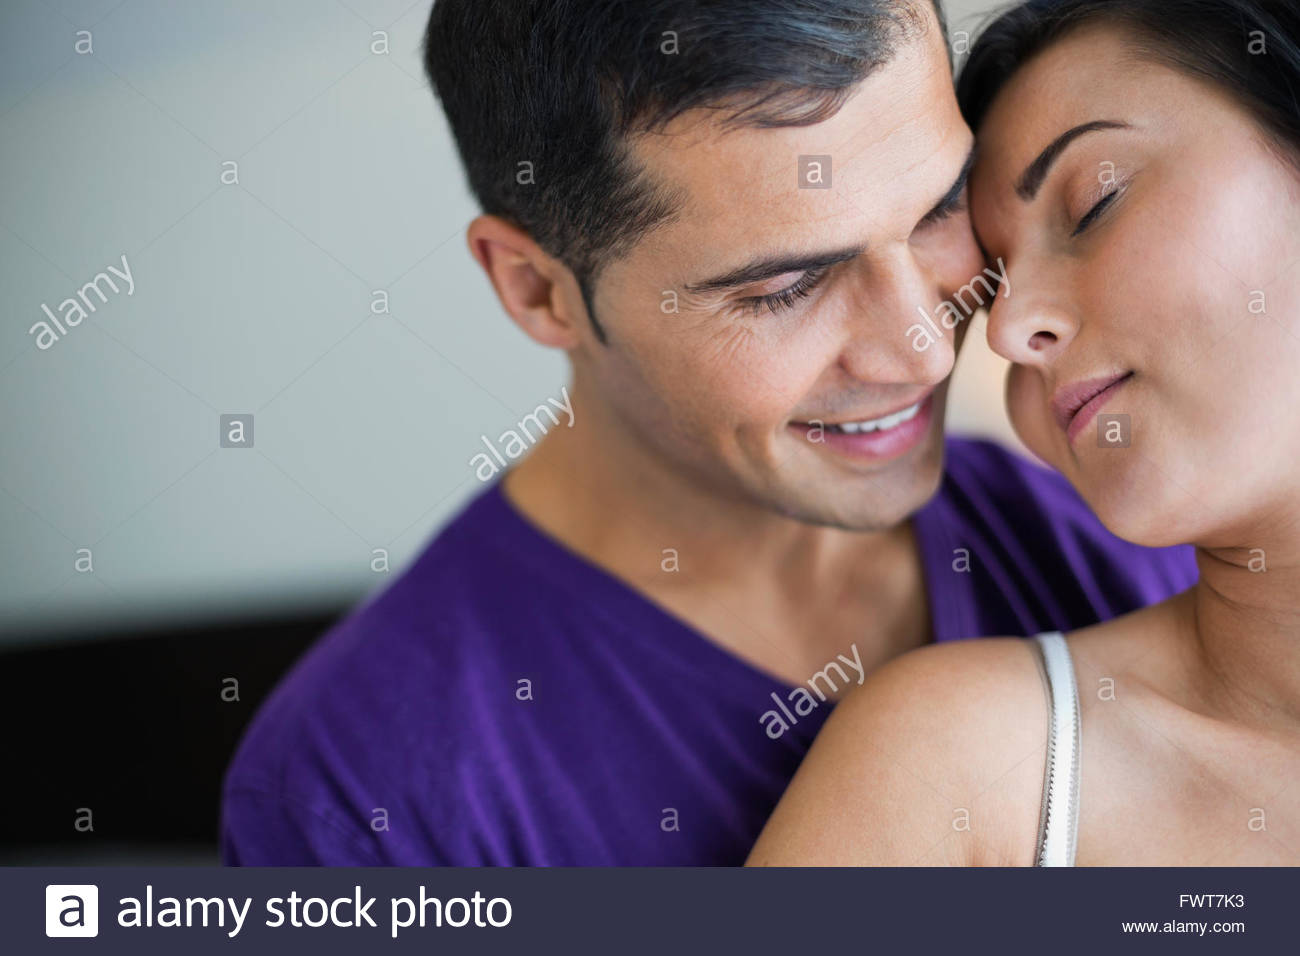 Close-up of happy couple being affectionate Stock Photo